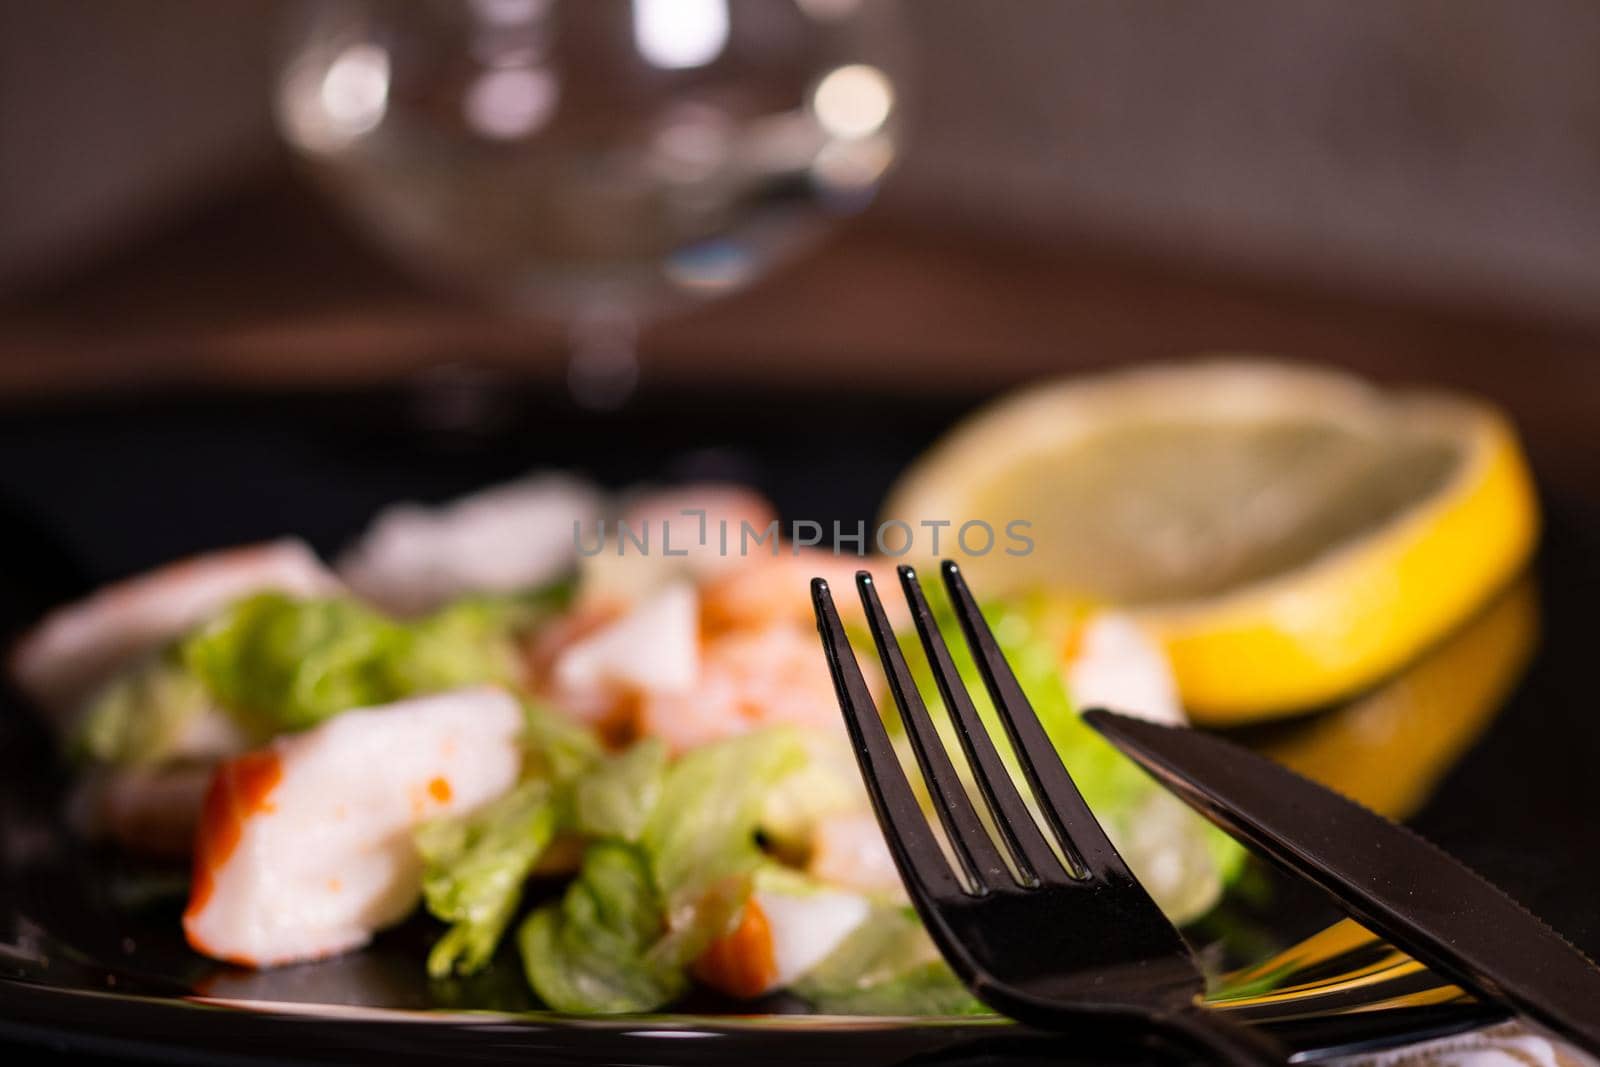 cutlery placed on a plate of fish salad by carfedeph